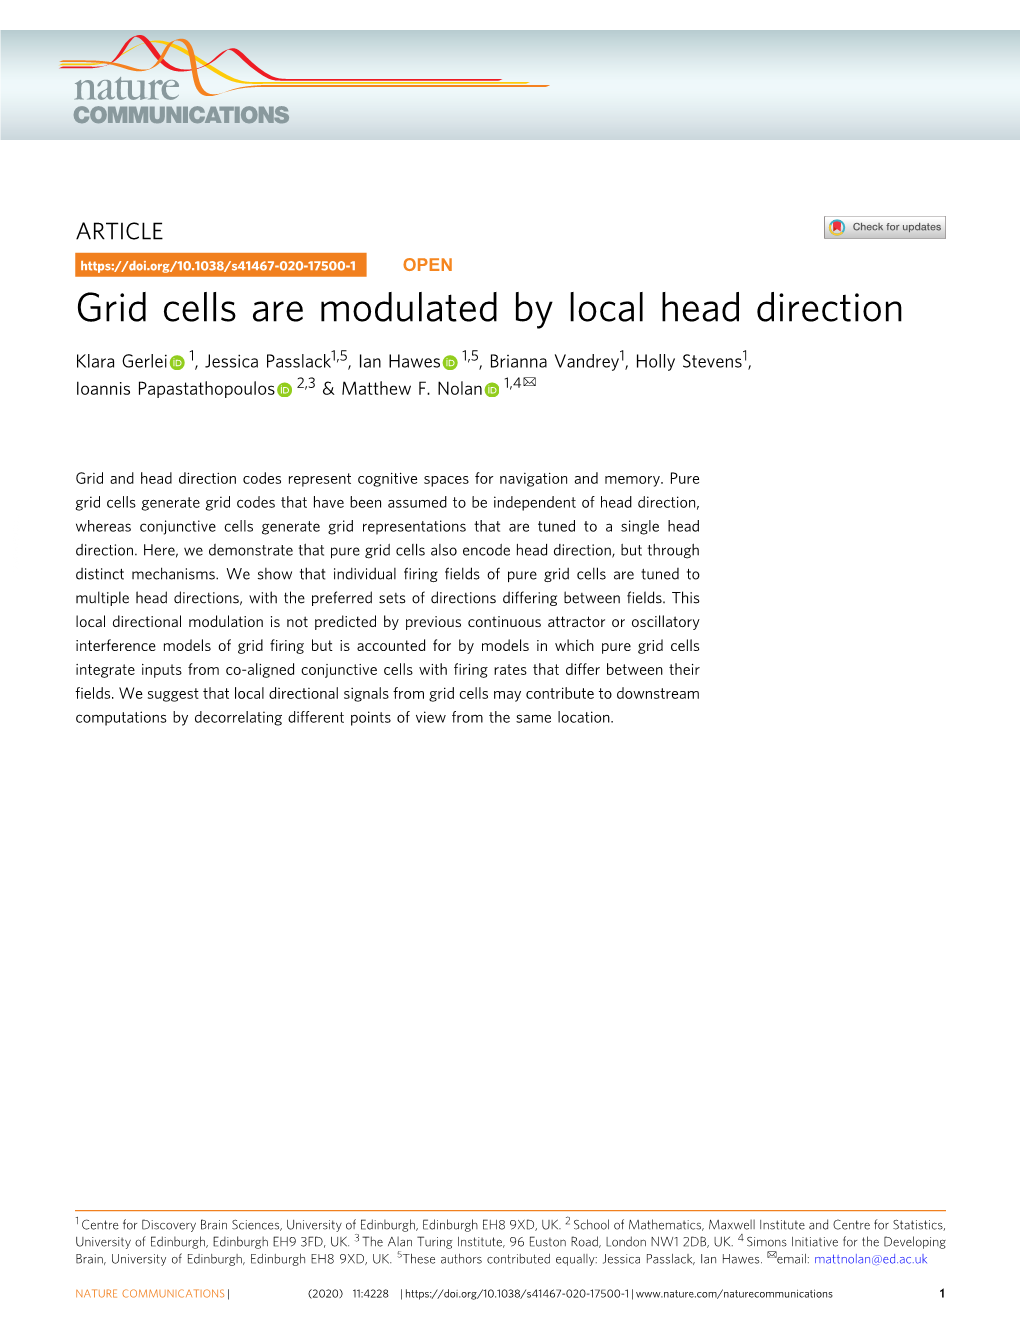 Grid Cells Are Modulated by Local Head Direction